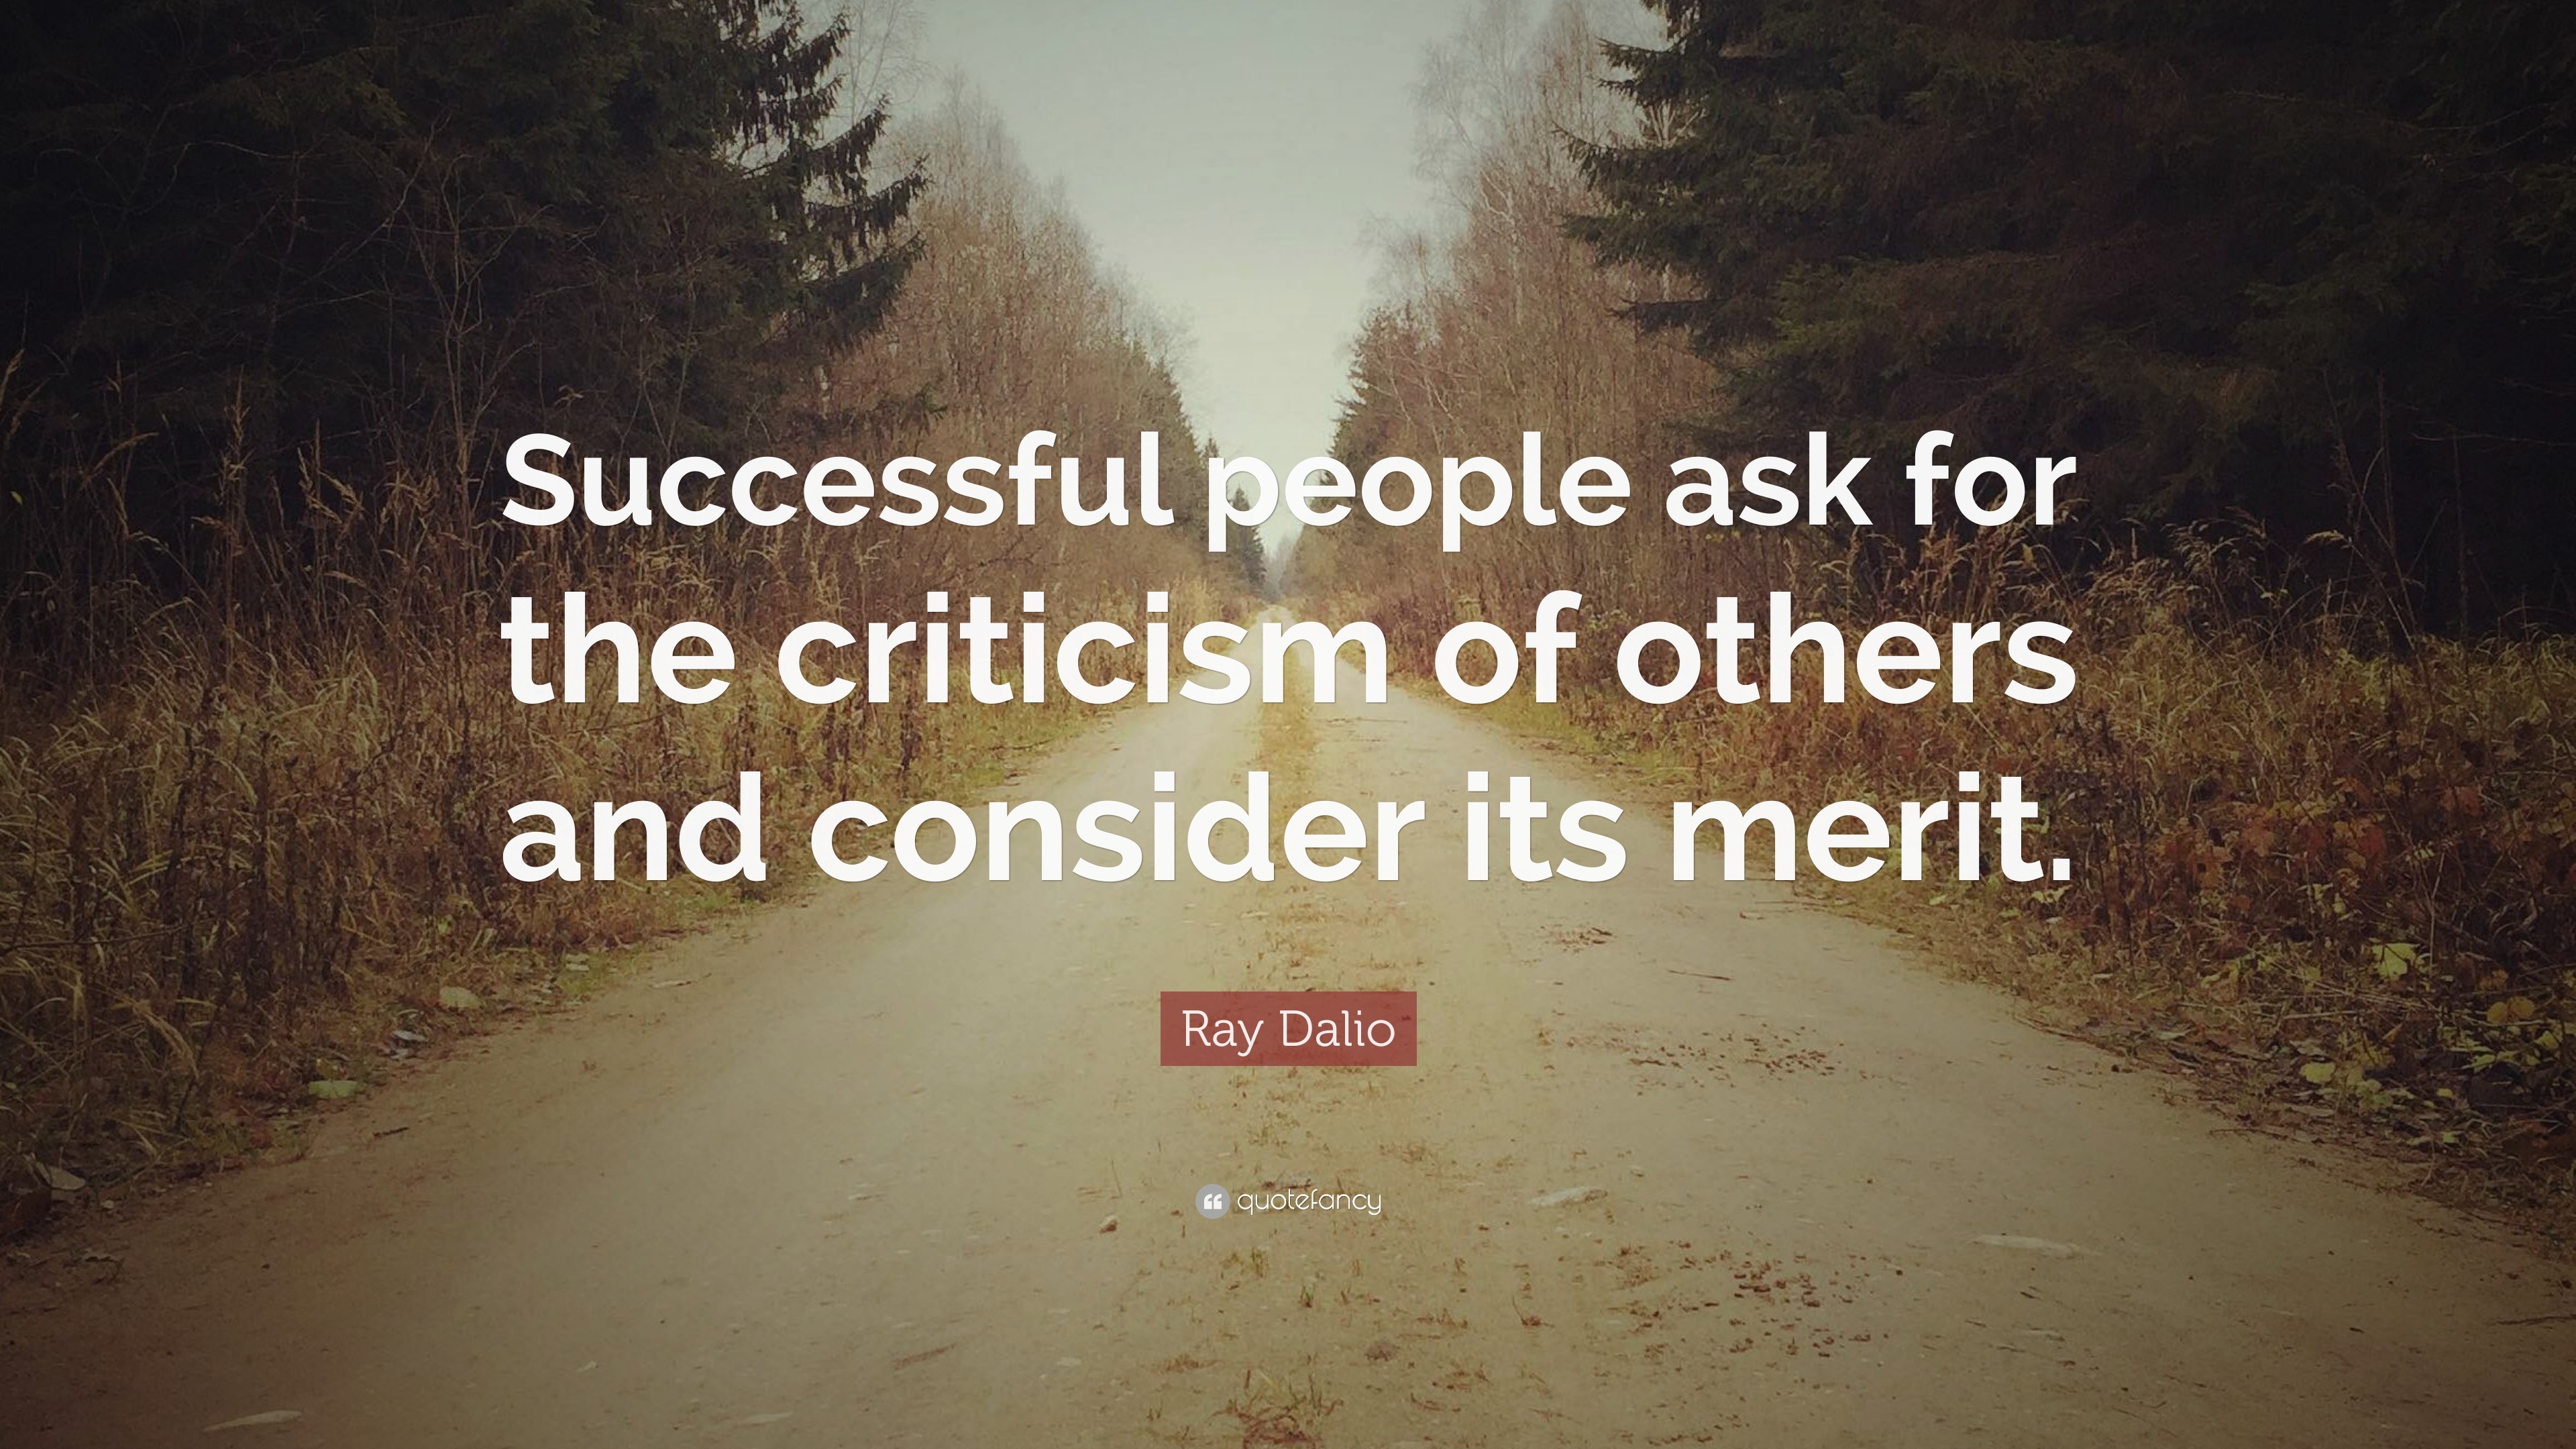 Ray Dalio Quote: “Successful people ask for the criticism of others and ...